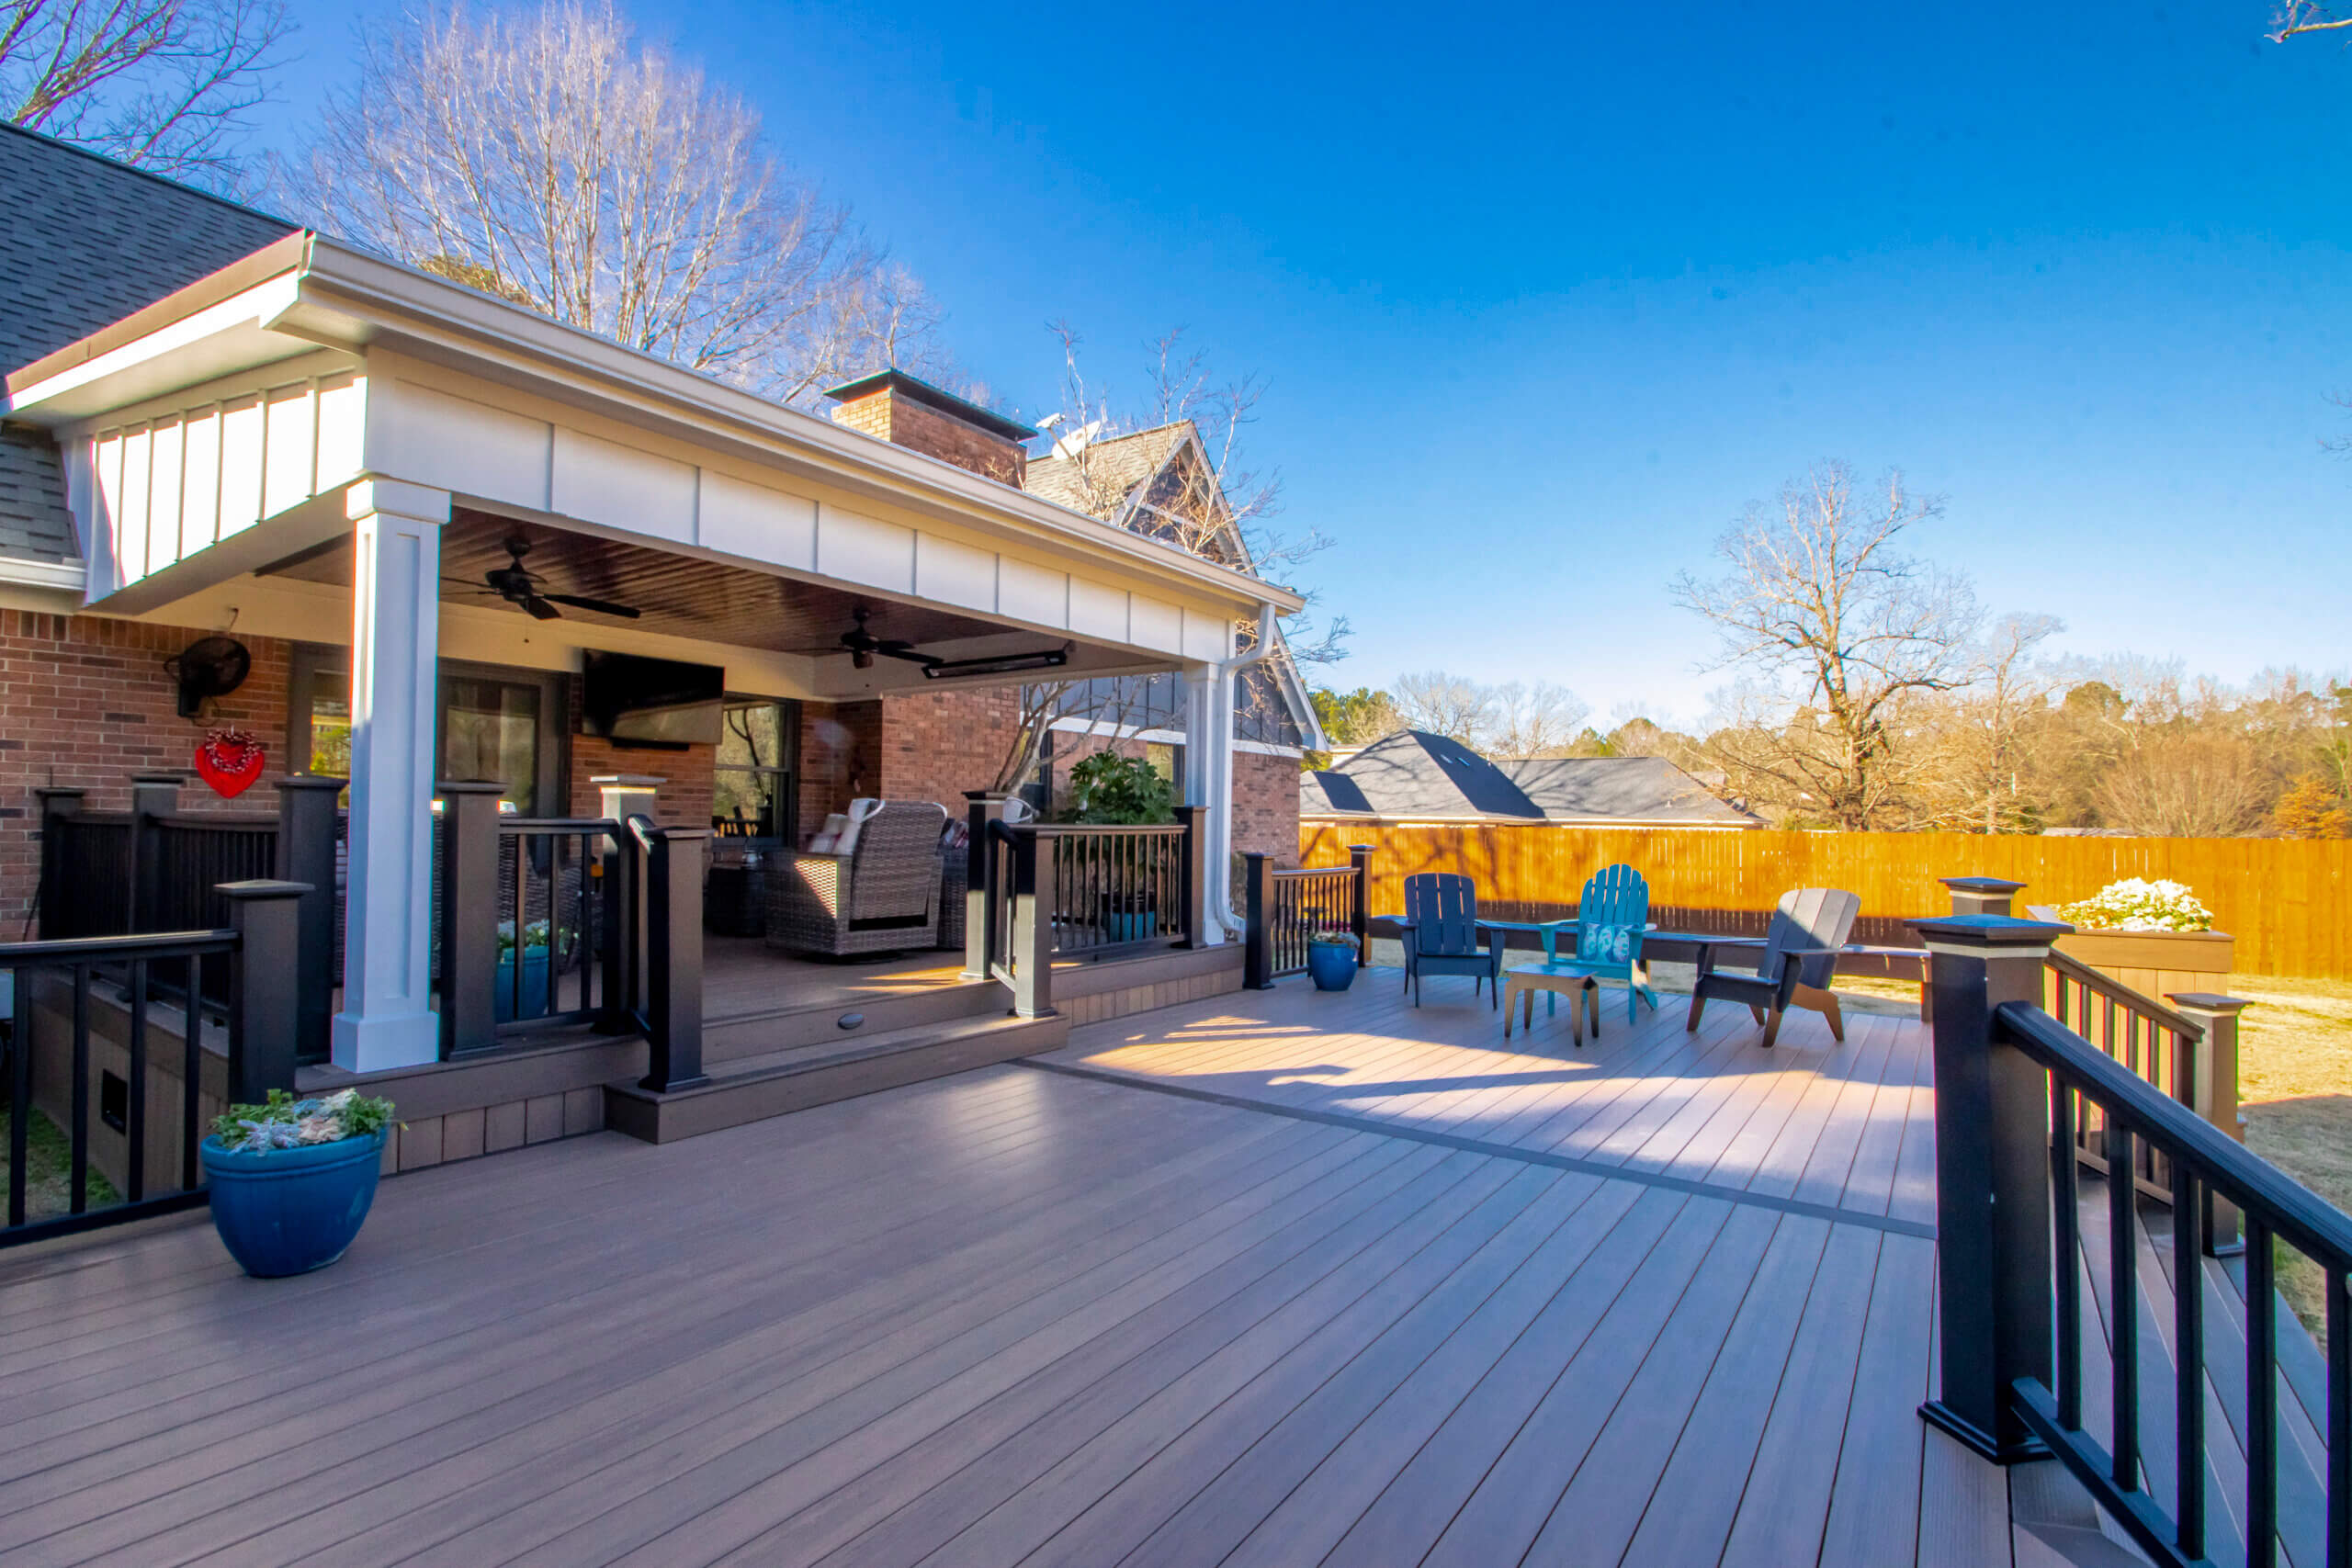 Expansive back deck off the back of a Marche home. BrownTimberTech flooring with black TimberTech rail system